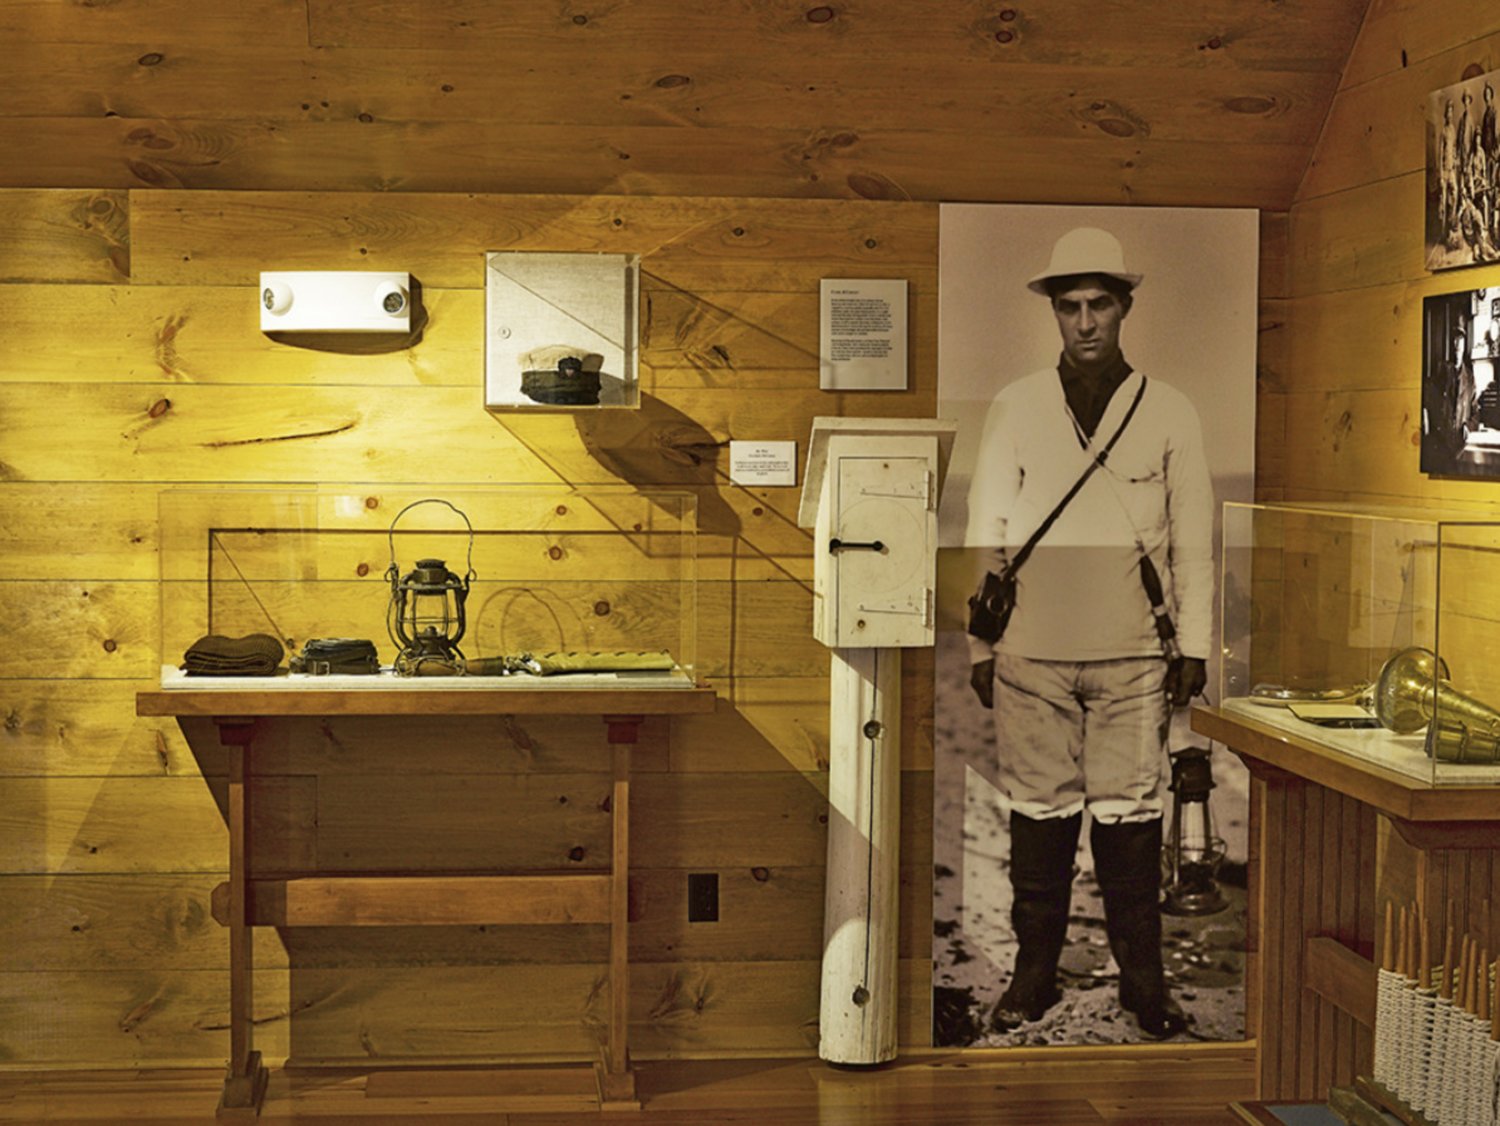 The Nantucket Shipwreck & Lifesaving Museum pays tribute to the island surfmen who rowed small open boats out to the shoals miles from the island to rescue sailors wrecked in storms.